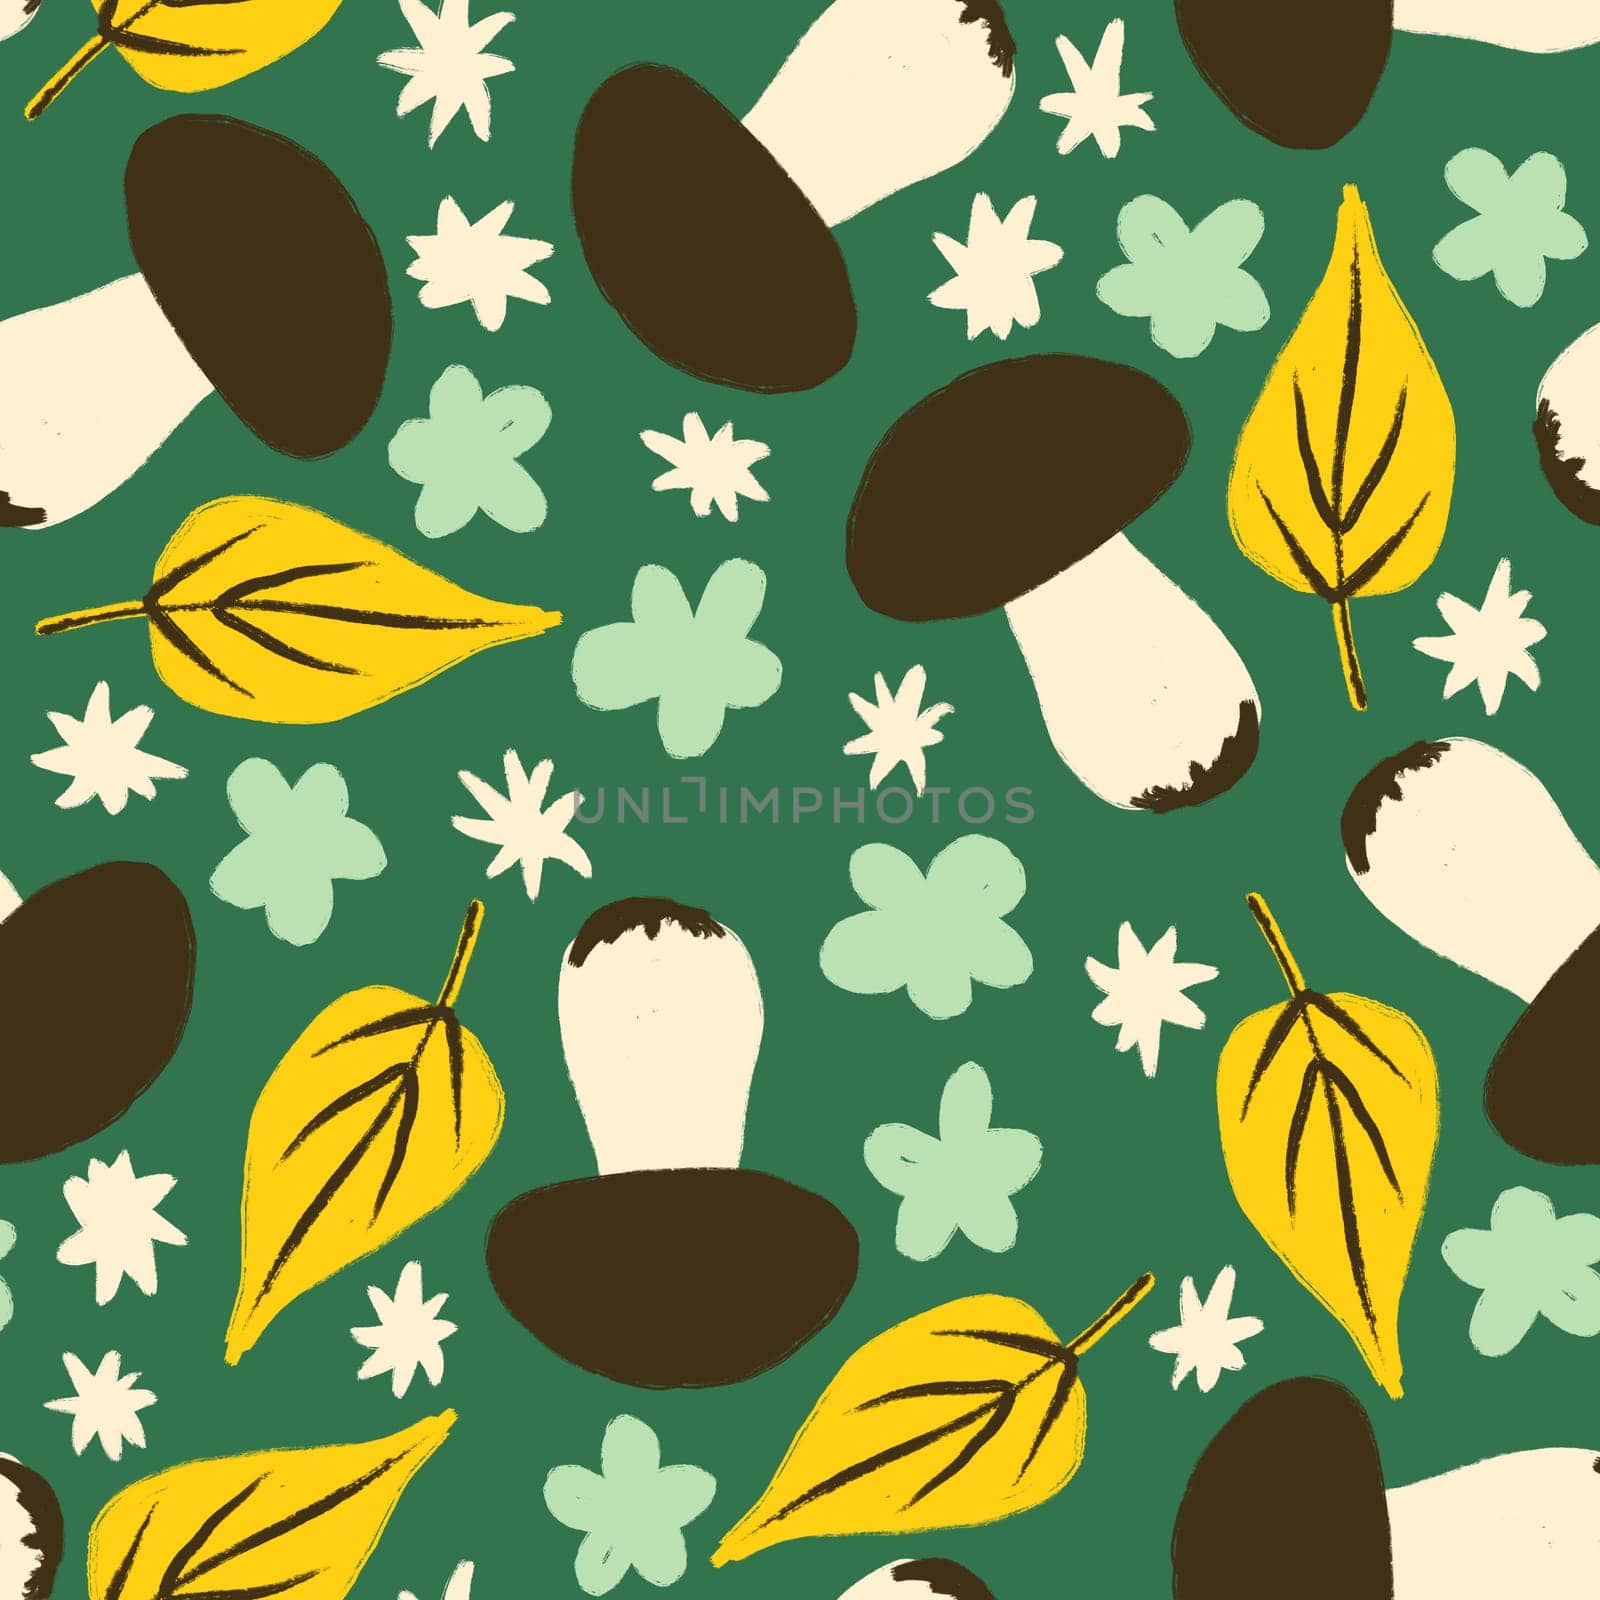 Hand drawn seamless pattern with forest mushroom fungi in brown yellow leaves on dark green background. Toadstool toxic fungi caps poisonous herbs wood woodland, witch concept, fall autumn flora